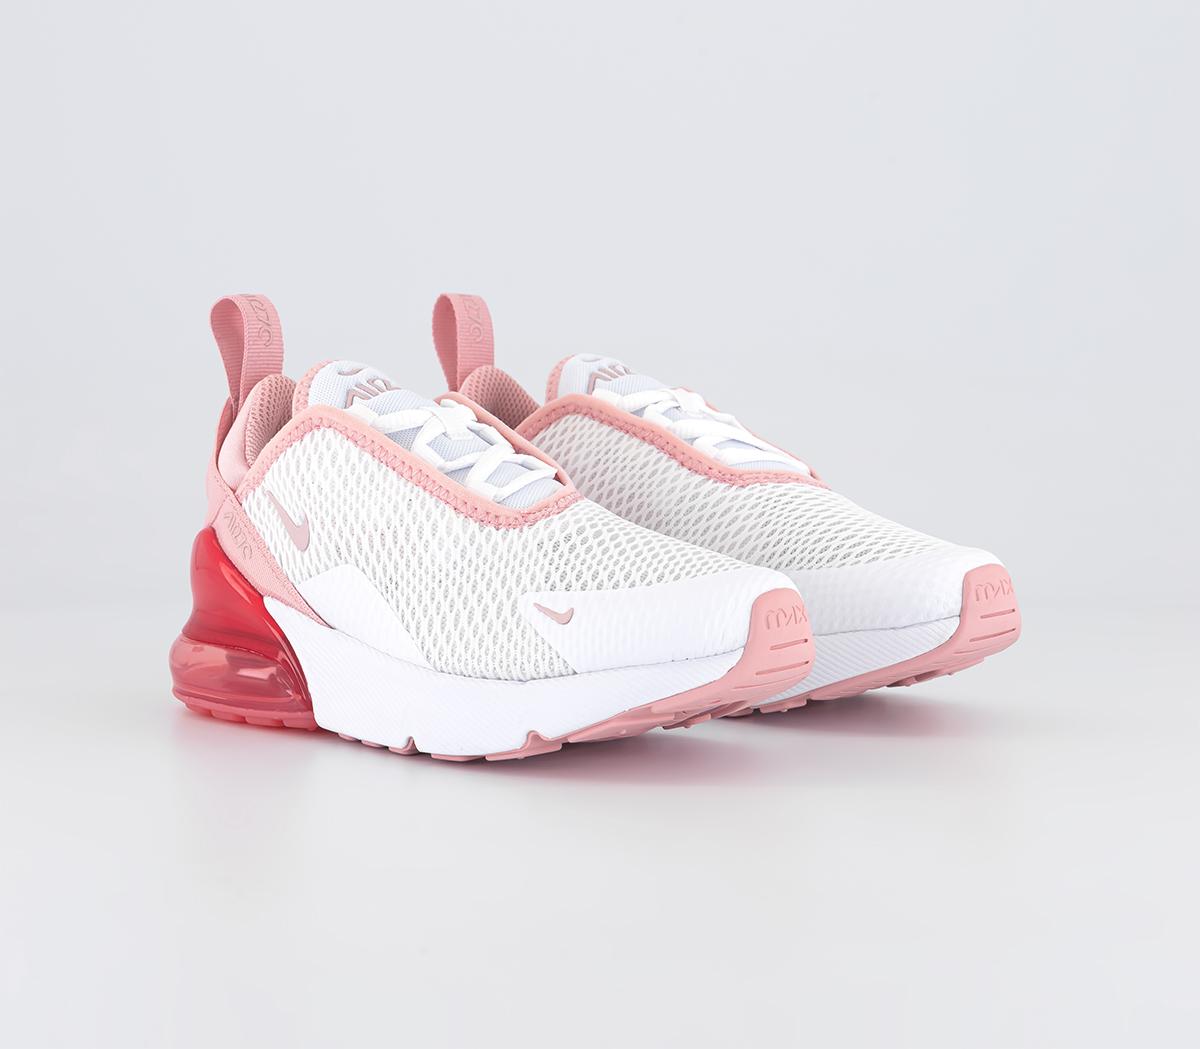 Nike Kids Air Max 270 Ps Trainers White Pink Glaze Pink Salt, 10 Youth